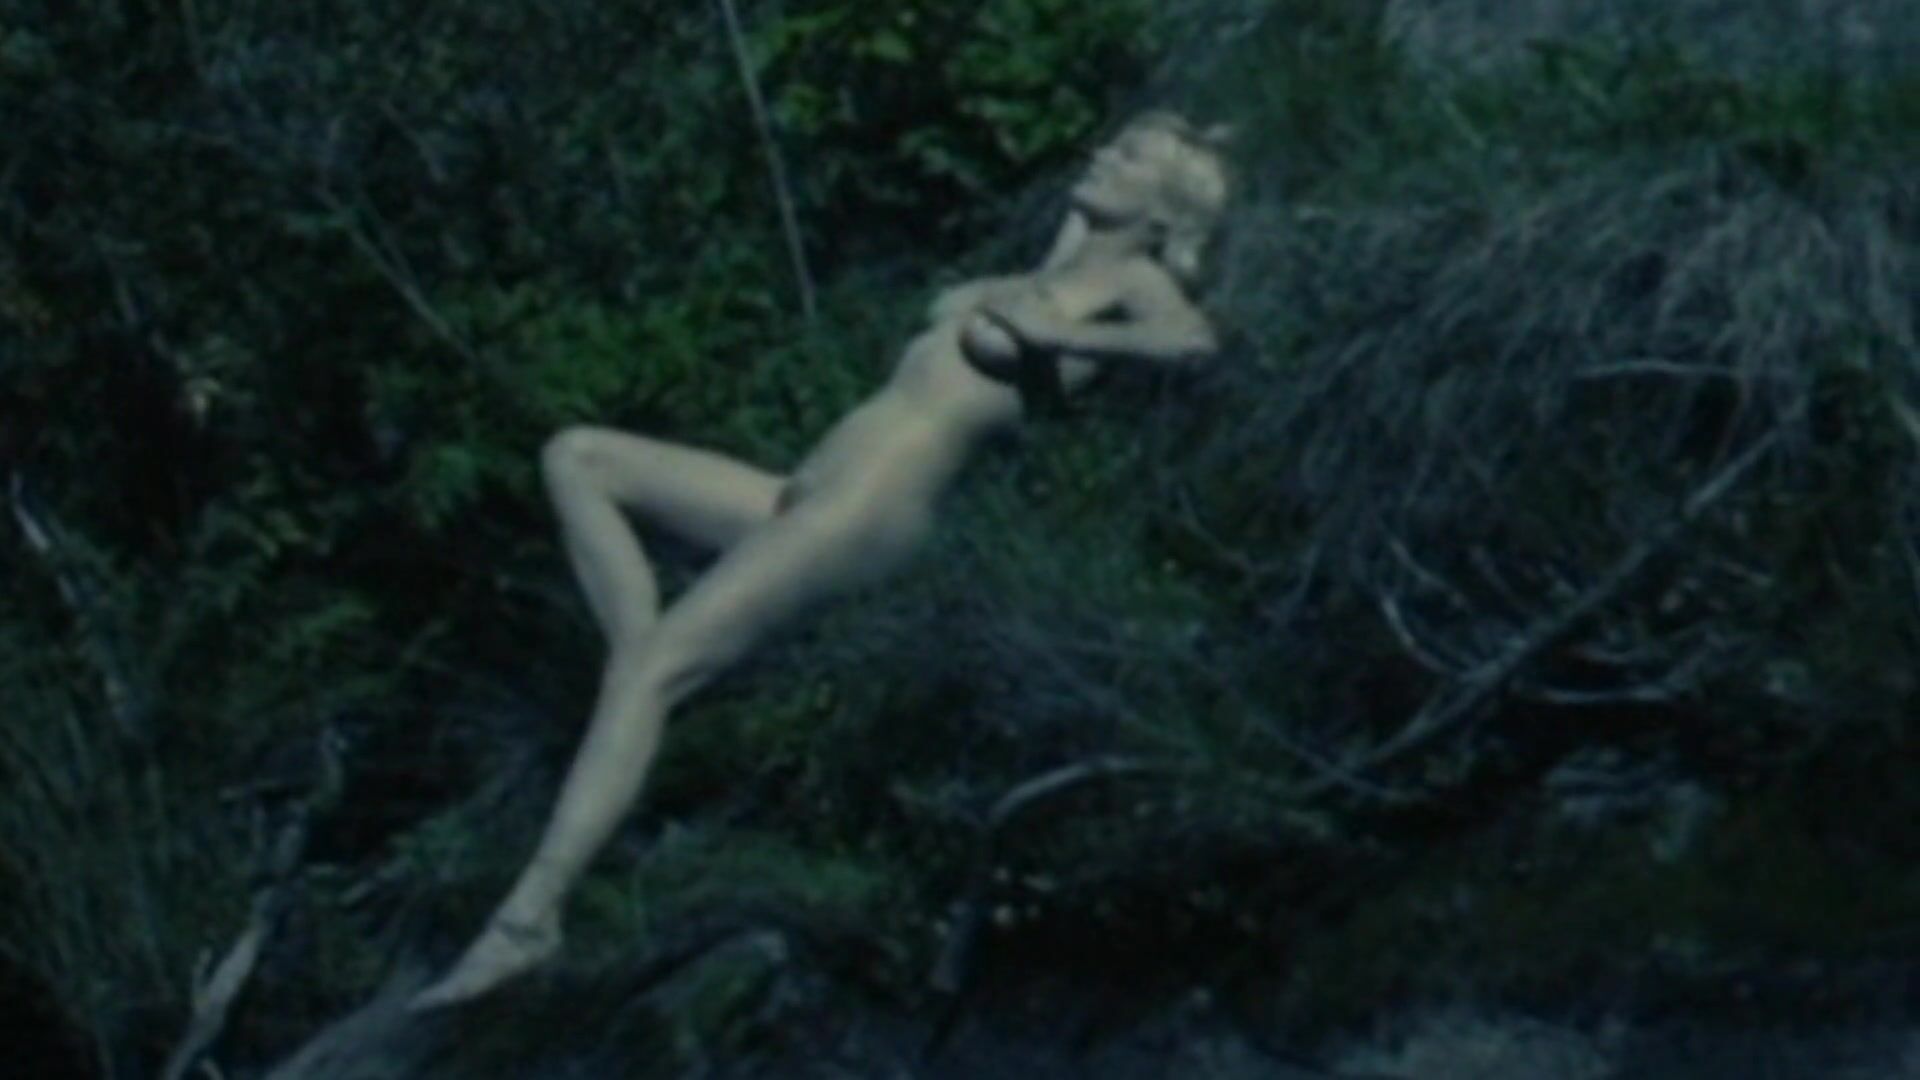 Rimjob Kirsten Dunst breaks into viewers' hearts with naked boobs in nude scenes from Melancholia AdultGames